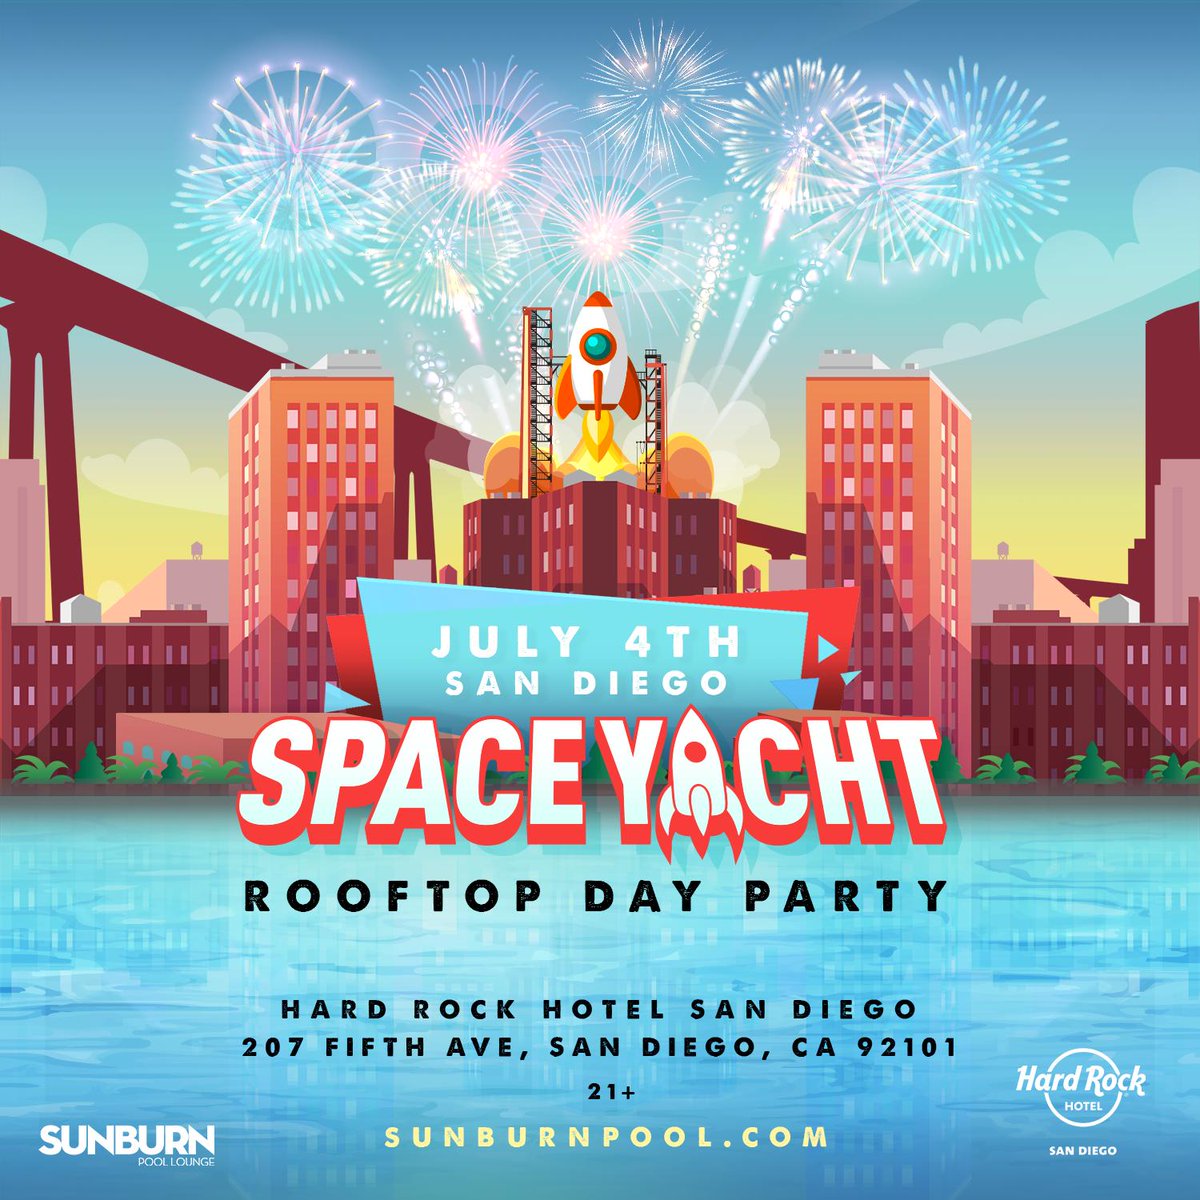 BREAKING NEWS SAN DIEGO. we are whipping up something crazy for you in the name of freedom, and best of all, we’re making it so that you can get in fo FREE... follow the instructions on our website to unlock 🎇 spaceyacht.net